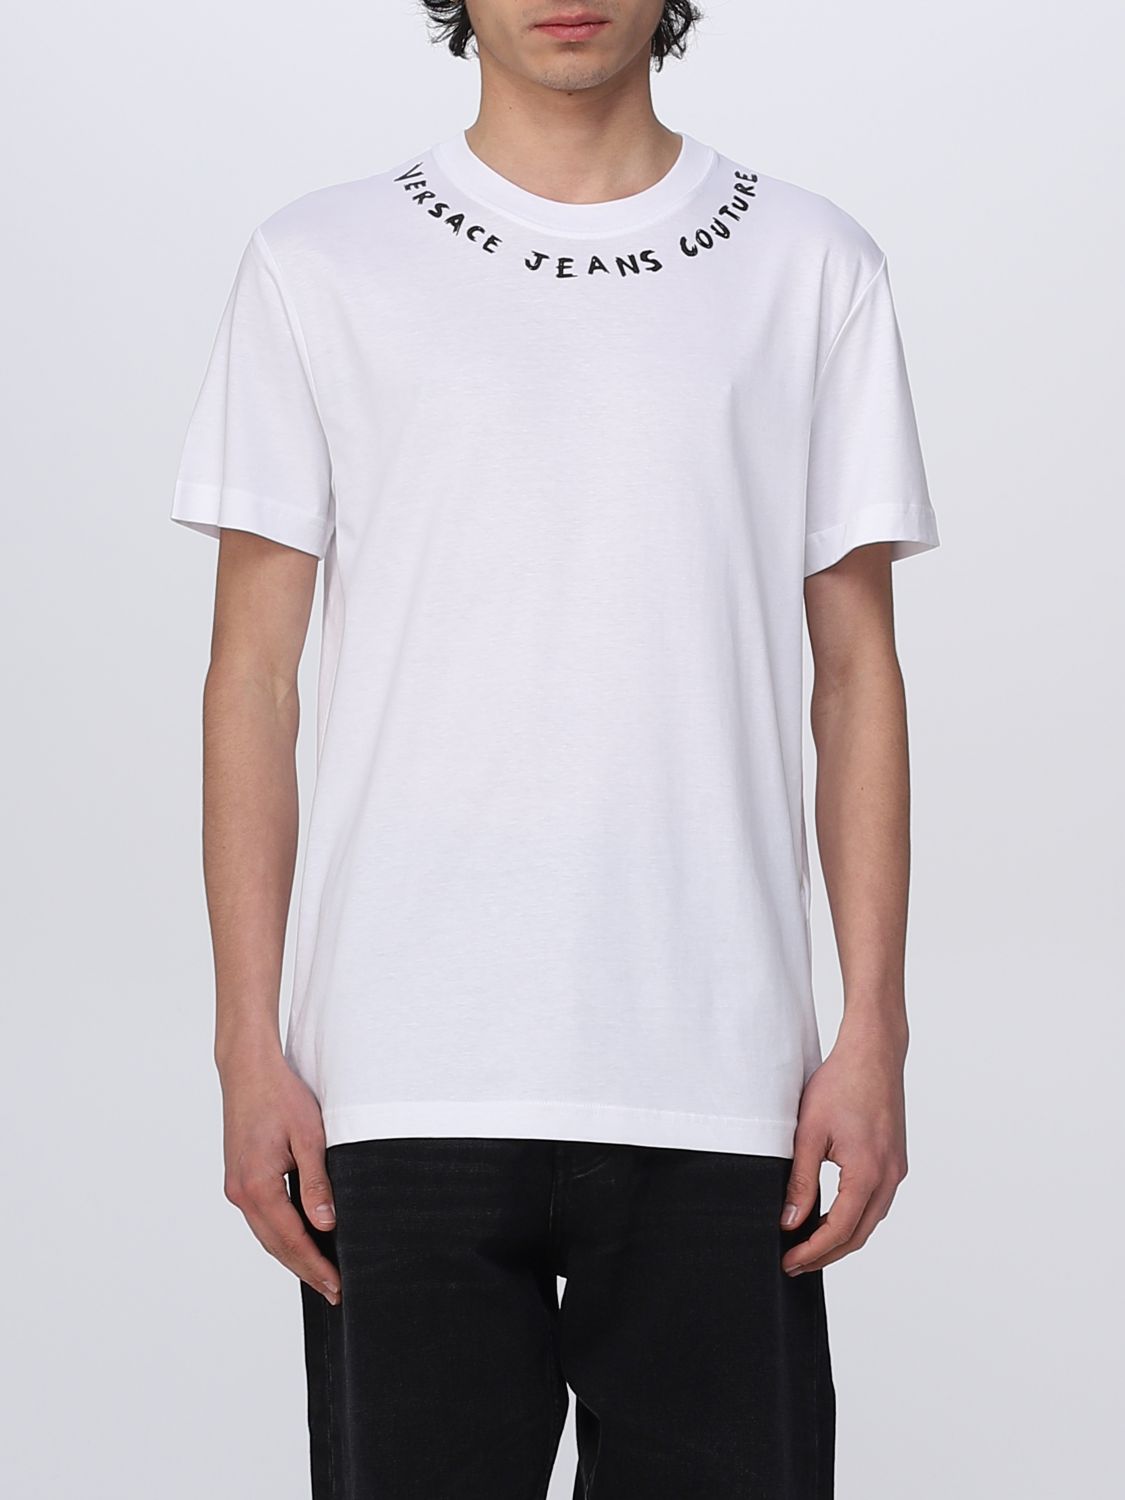 VERSACE JEANS COUTURE: t-shirt for man - White | Versace Jeans Couture ...